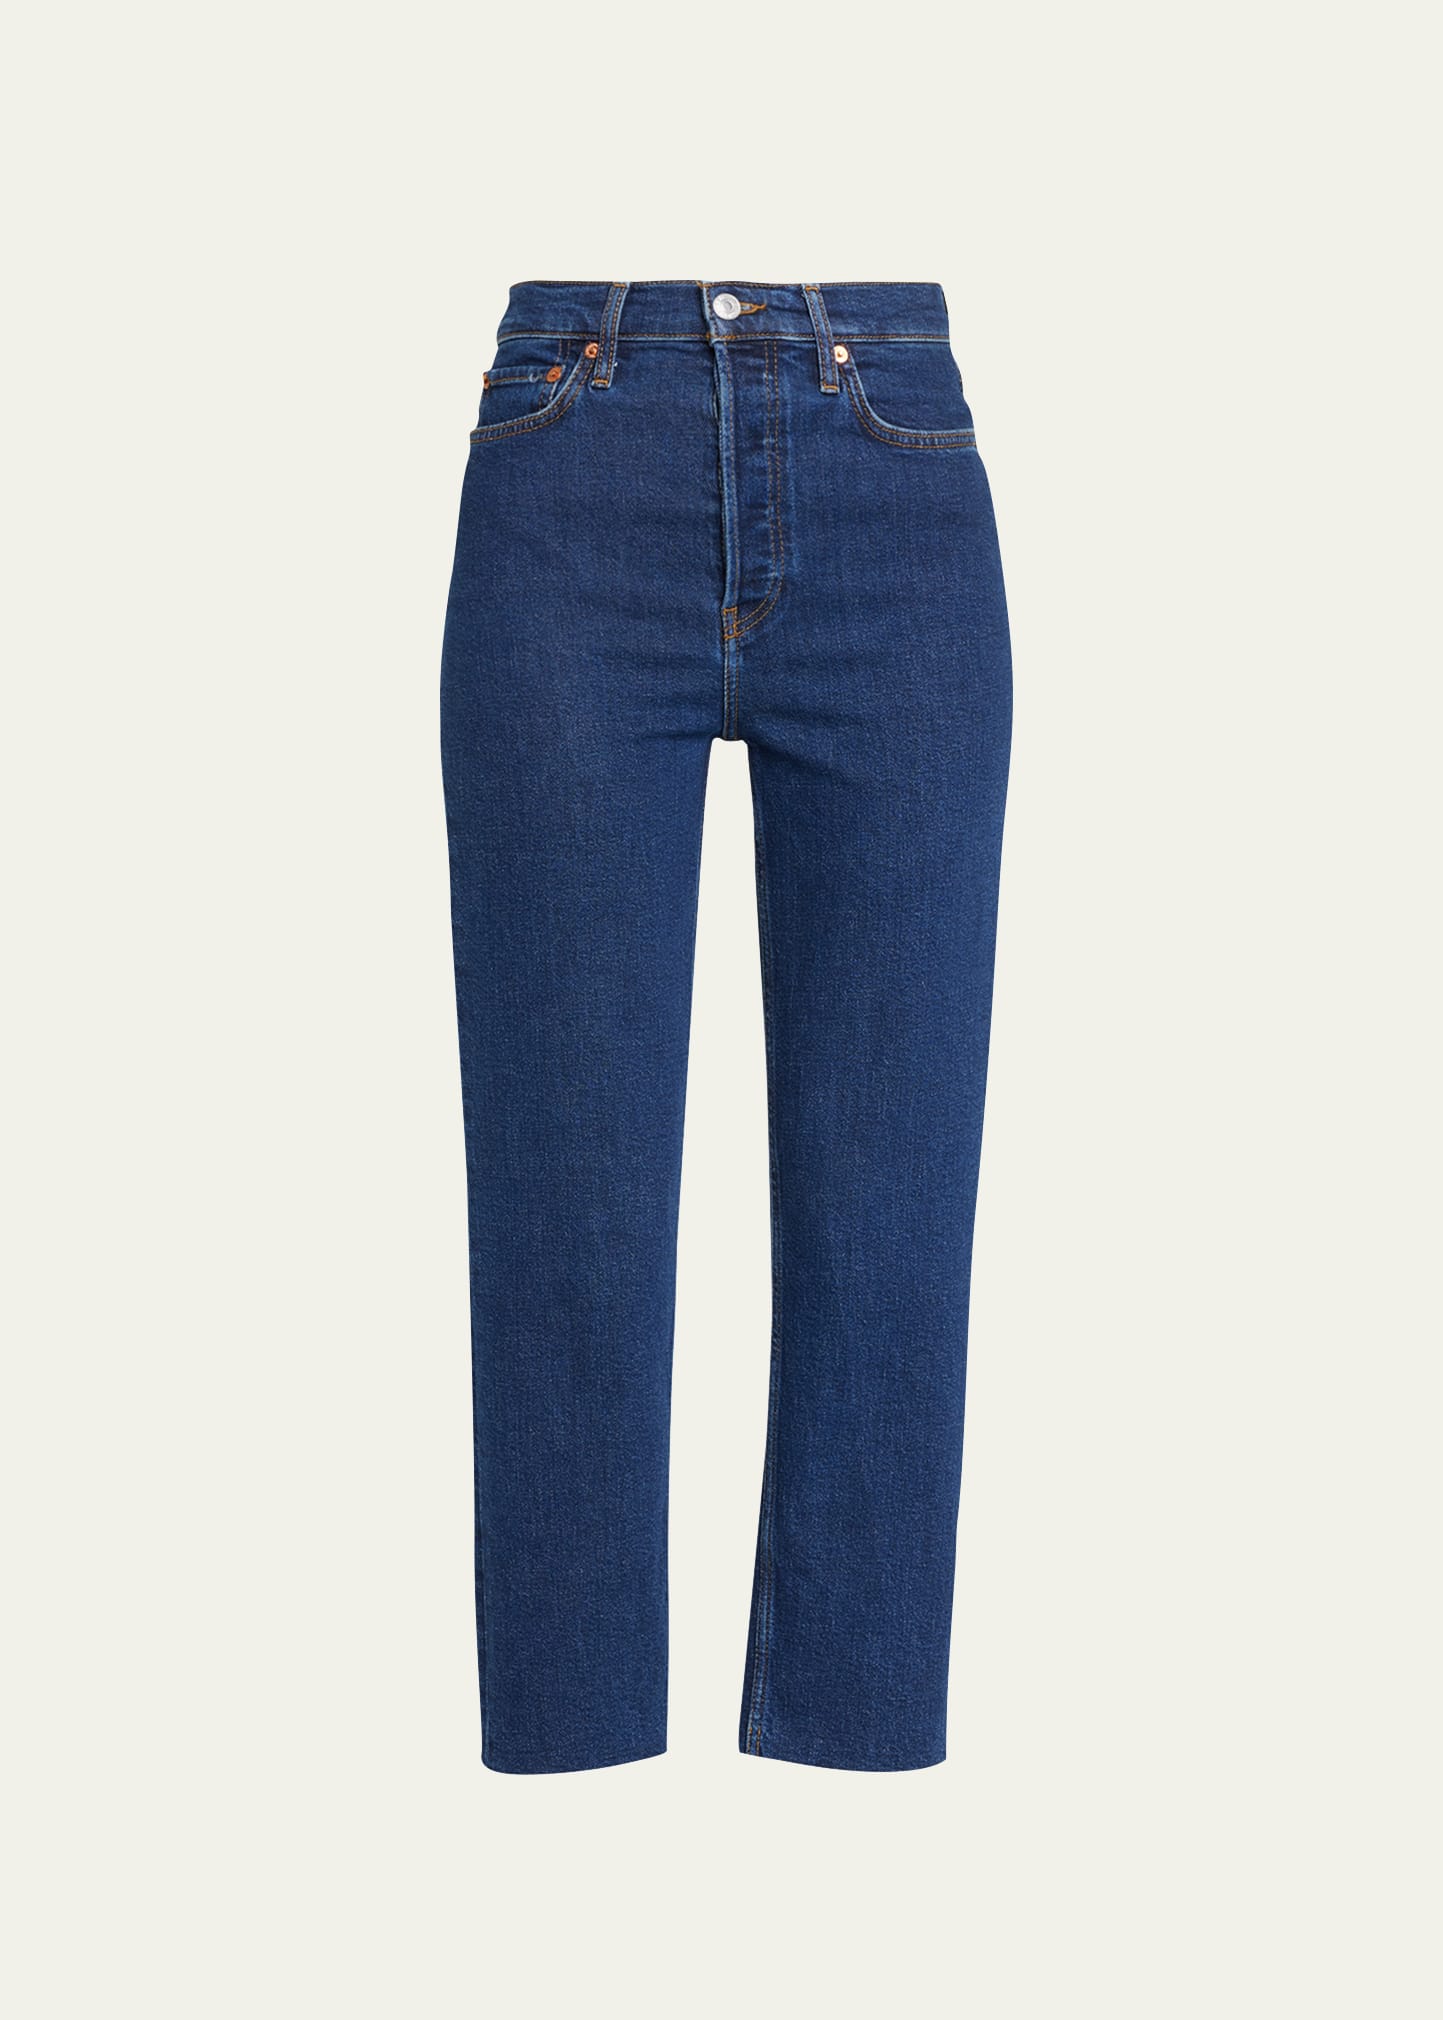 RE/DONE High-Rise Stovepipe Jeans with Raw-Edge Hem